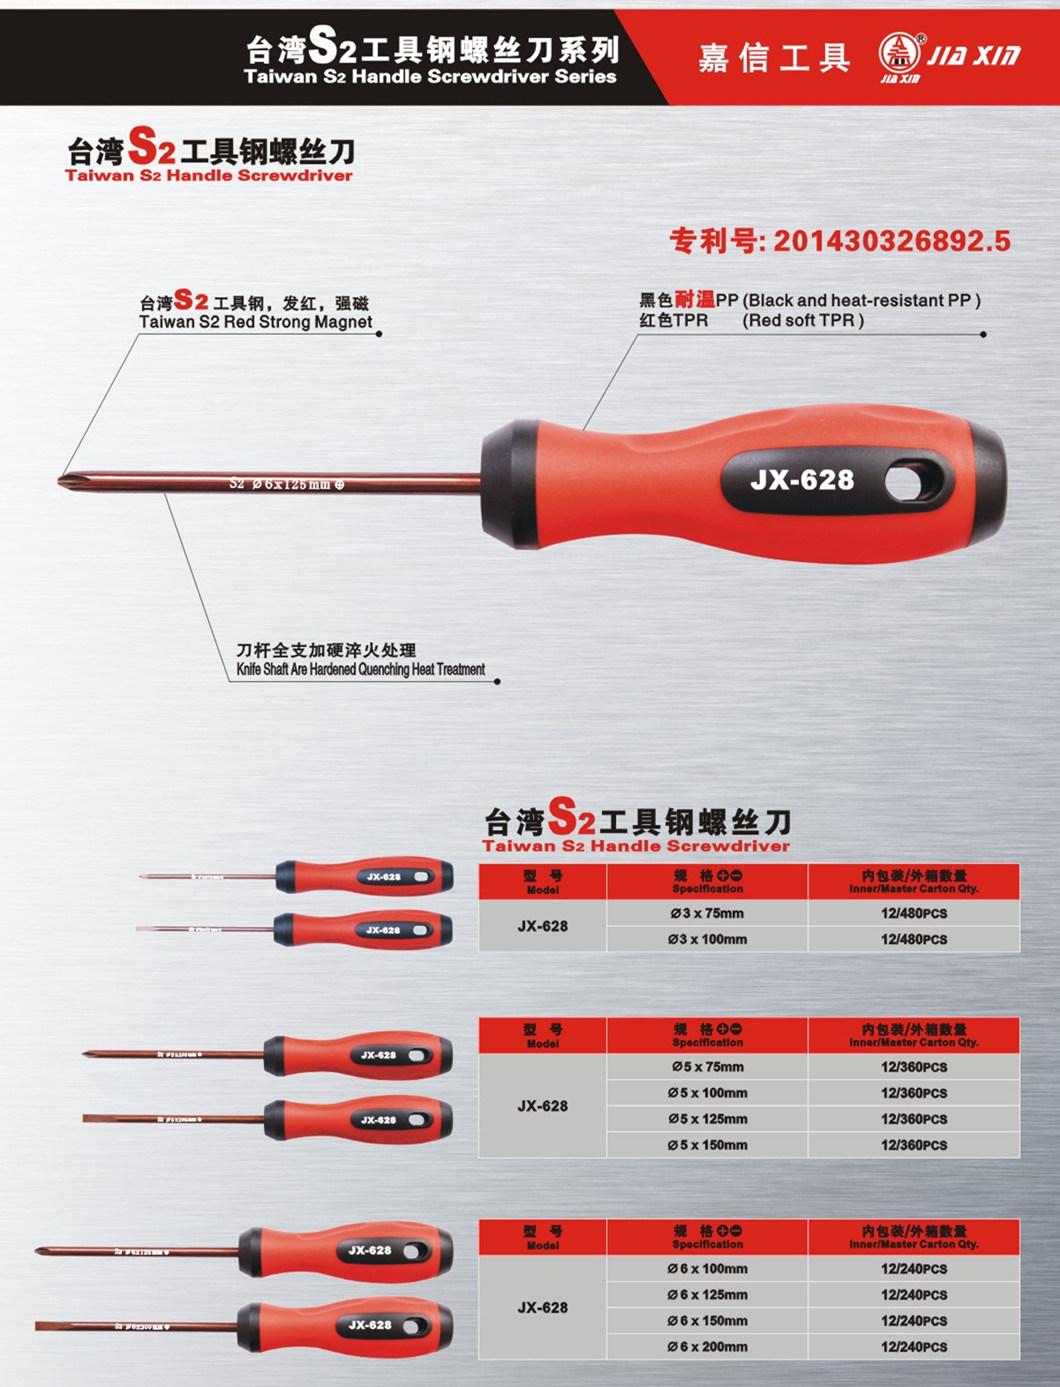 Screwdriver with Hole for Increased Torque with Full Support of Batch Rod Hardened